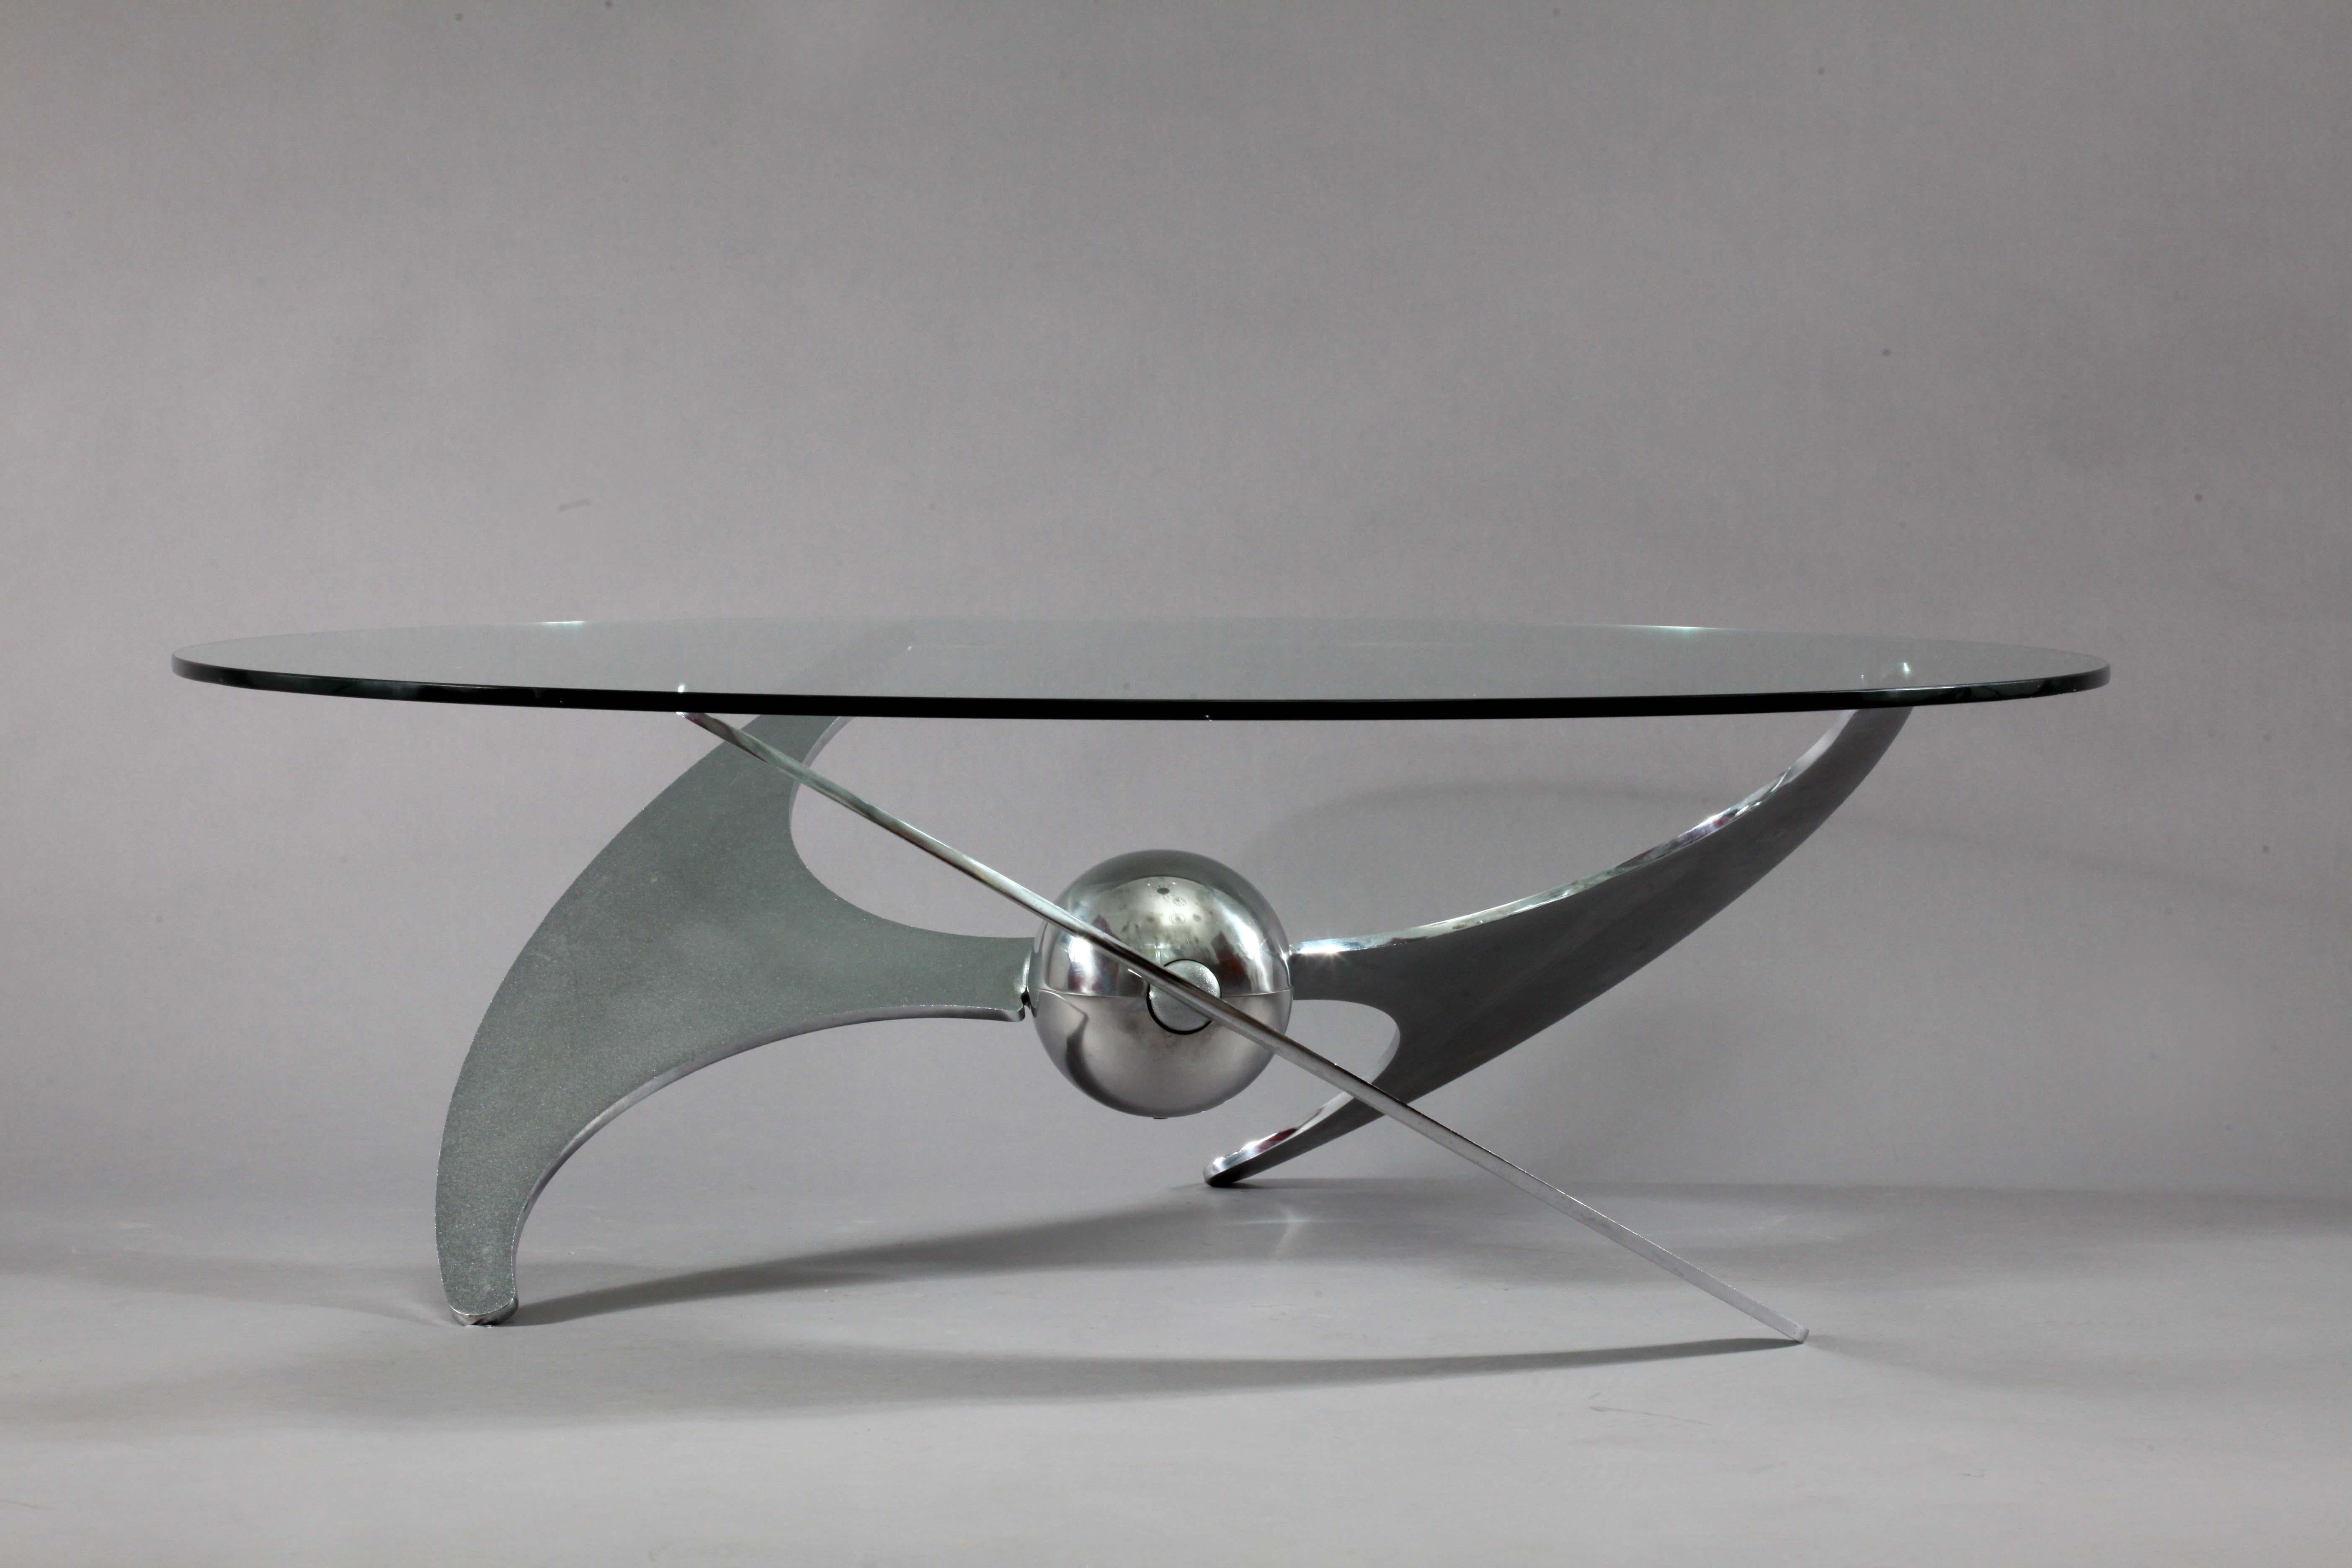 Coffee or dining table,
Designed L.Campanini for Carma,
Italy 1973.
Chromium plated steel,
Adjustable wings in position coffee table or dining table
Measures: Height coffee table 43 cm
Height dining table 78 cm
Diameter glass plate 130 cm.